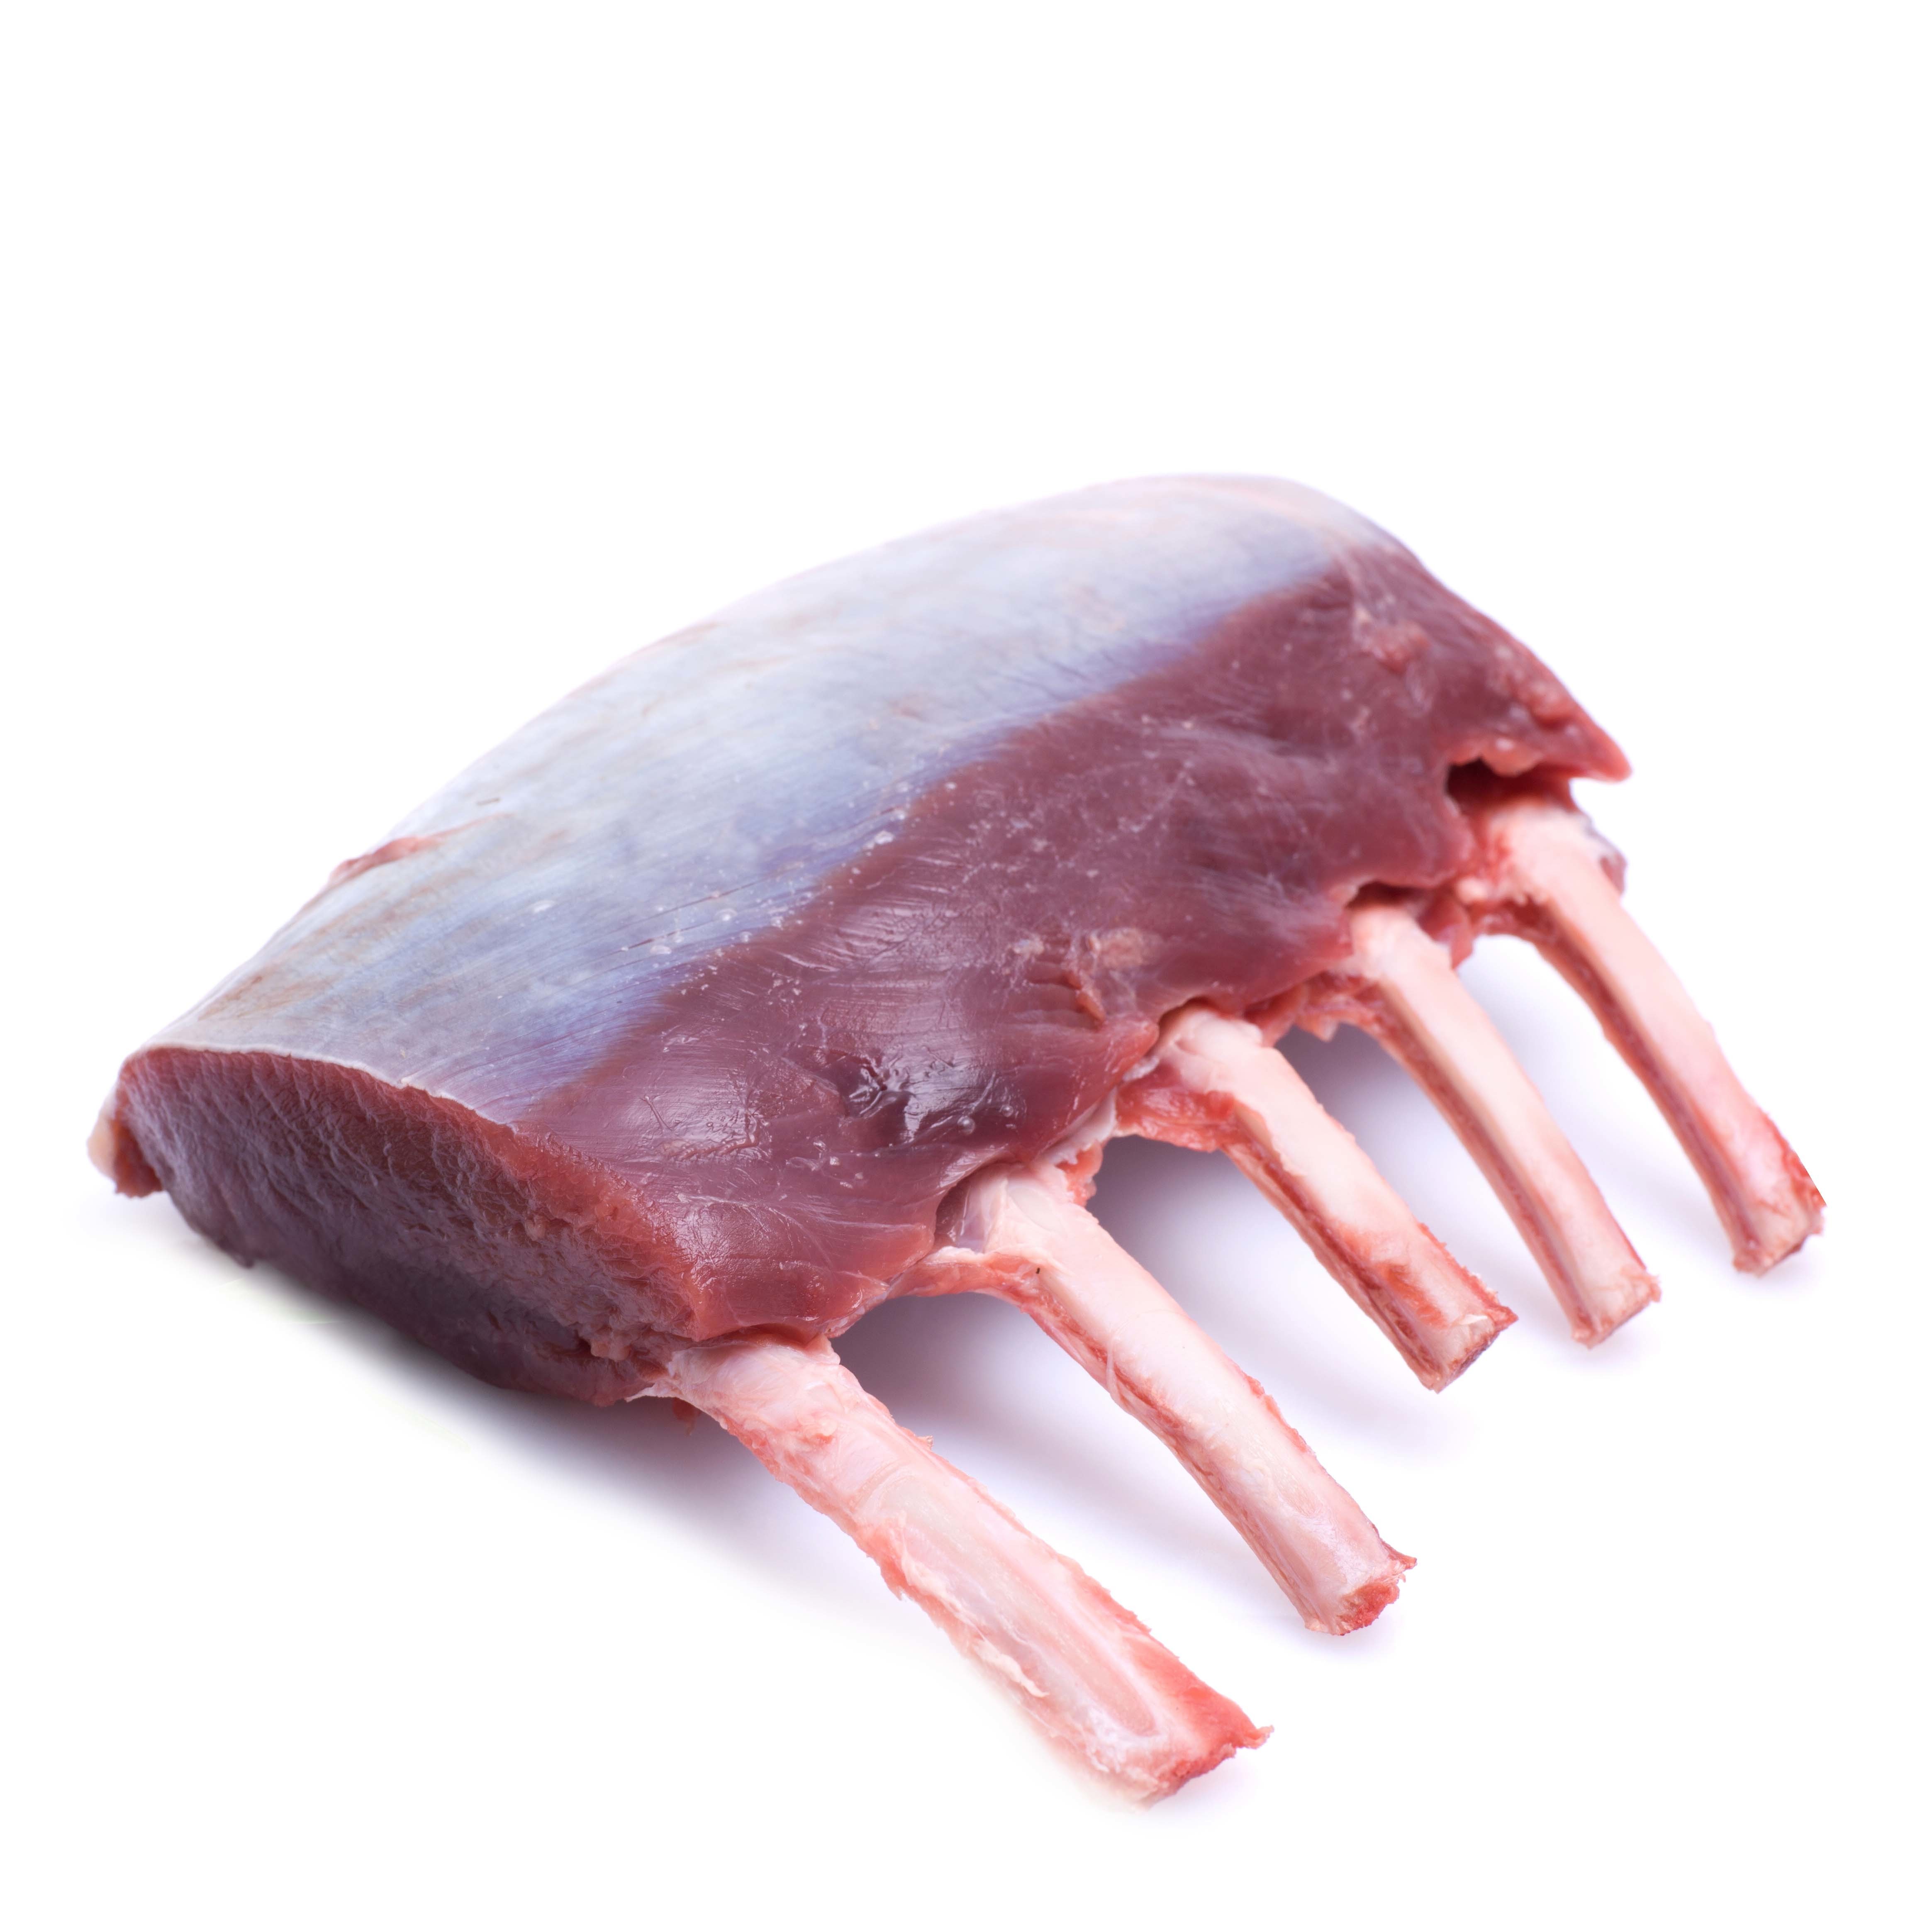 Frozen Donald Russell Wild Red Deer Frenched Rack 500g - UK*